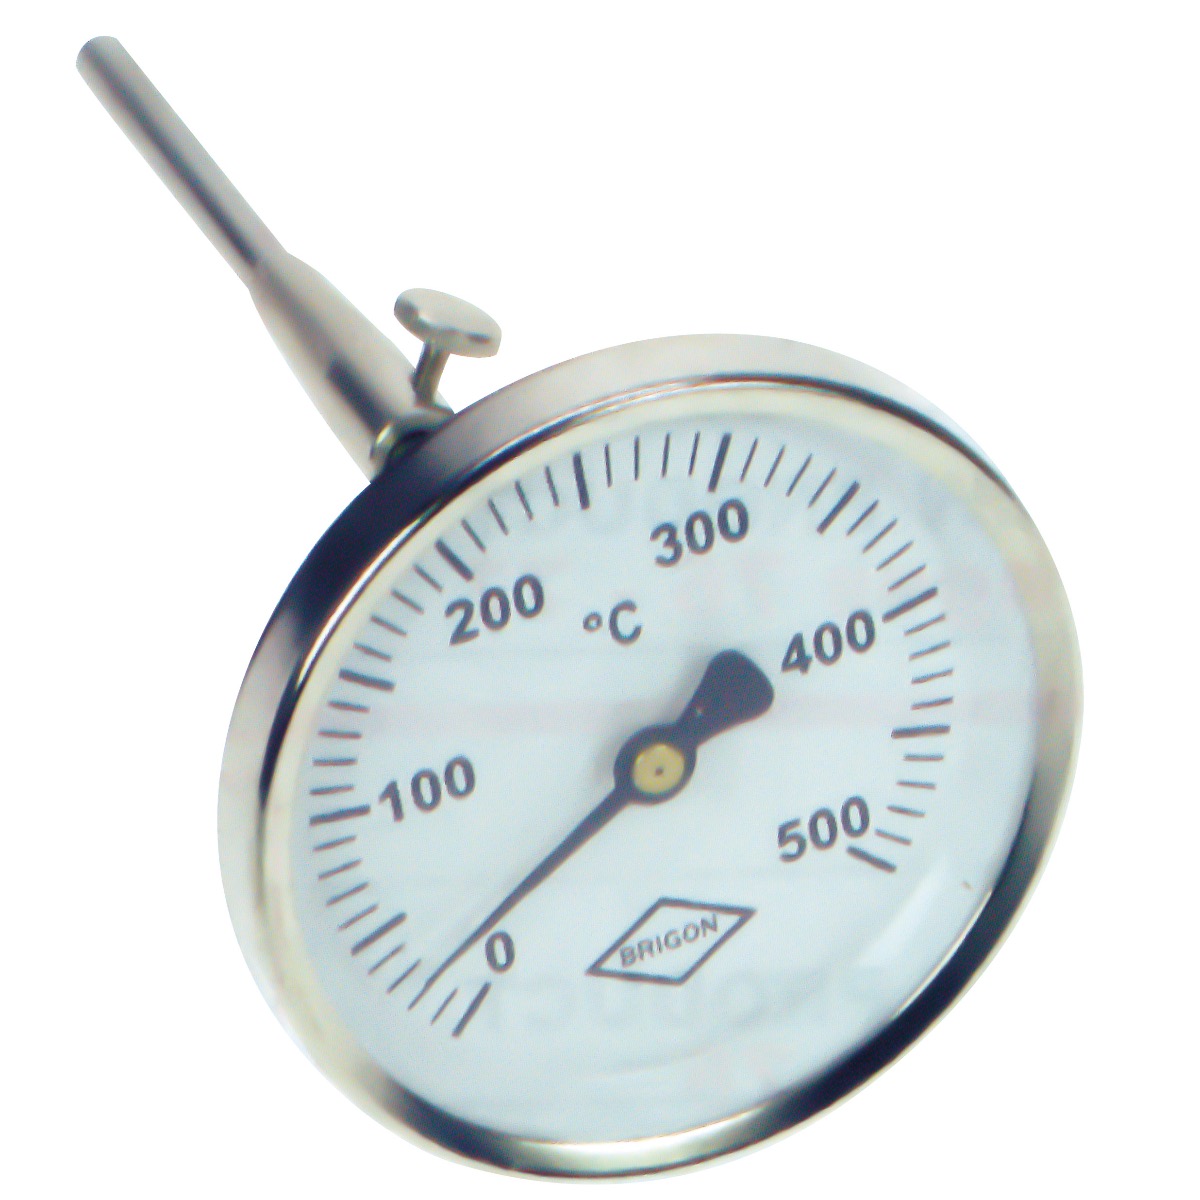 80mm Dial Flue Gas Thermometer - 150mm stem, 0-500°C